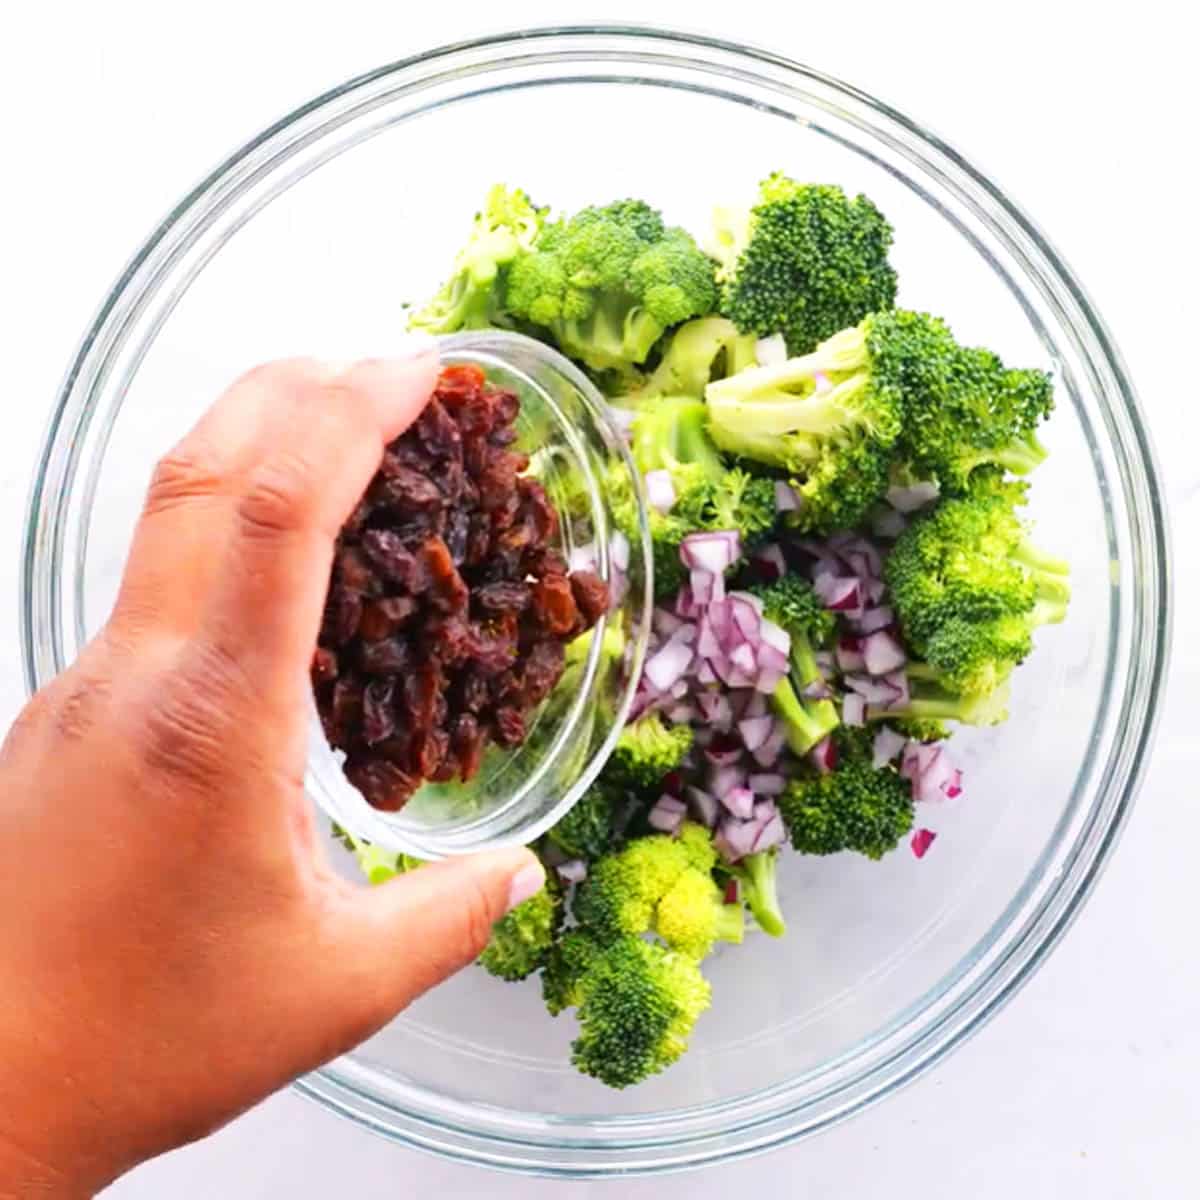 Hand pouring a small bowl of chopped bacon into the broccoli salad in a large glass bowl.